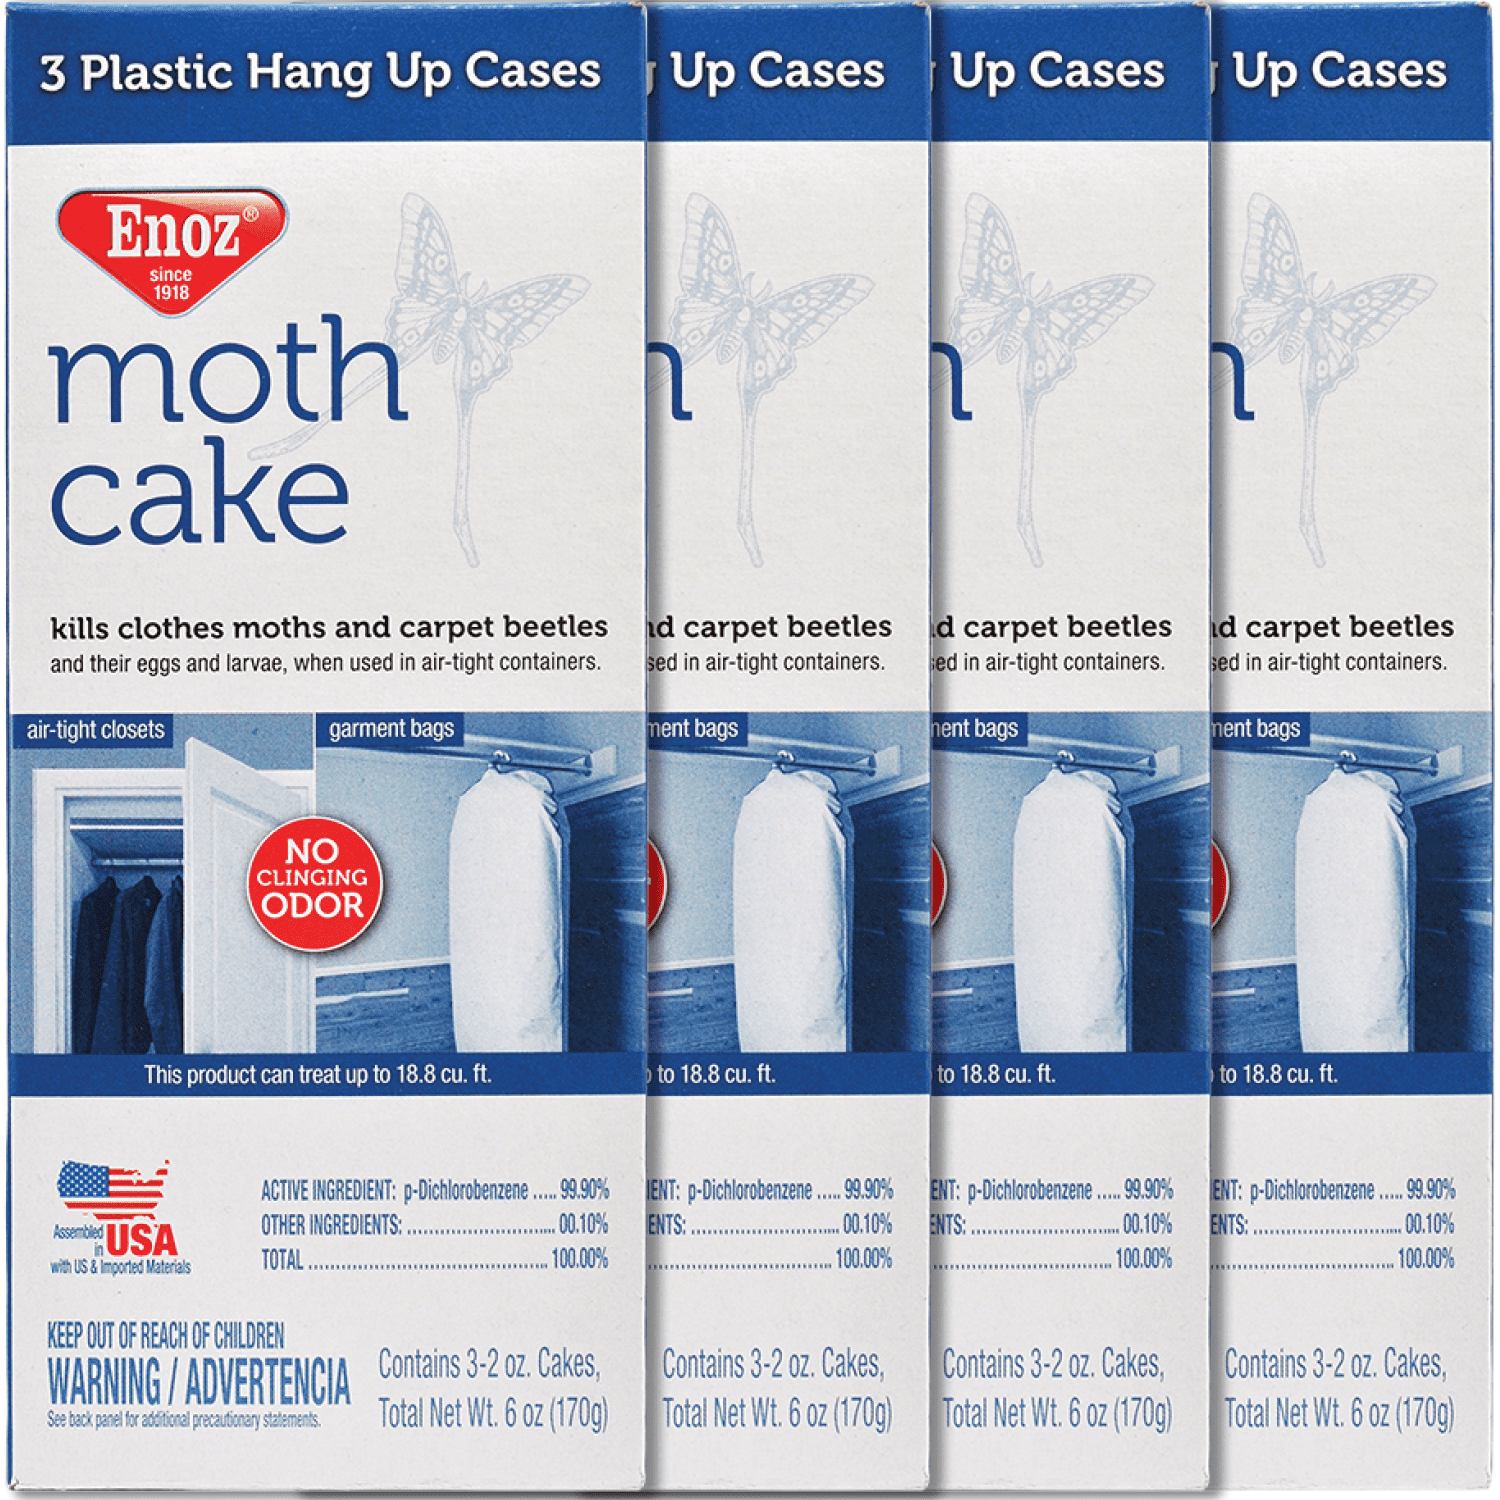 Enoz Moth Cake Insect Repellent Refill For Moths 2 2 oz refills per box. 12  boxes. Free shipping. - Gardening Supplies, Facebook Marketplace